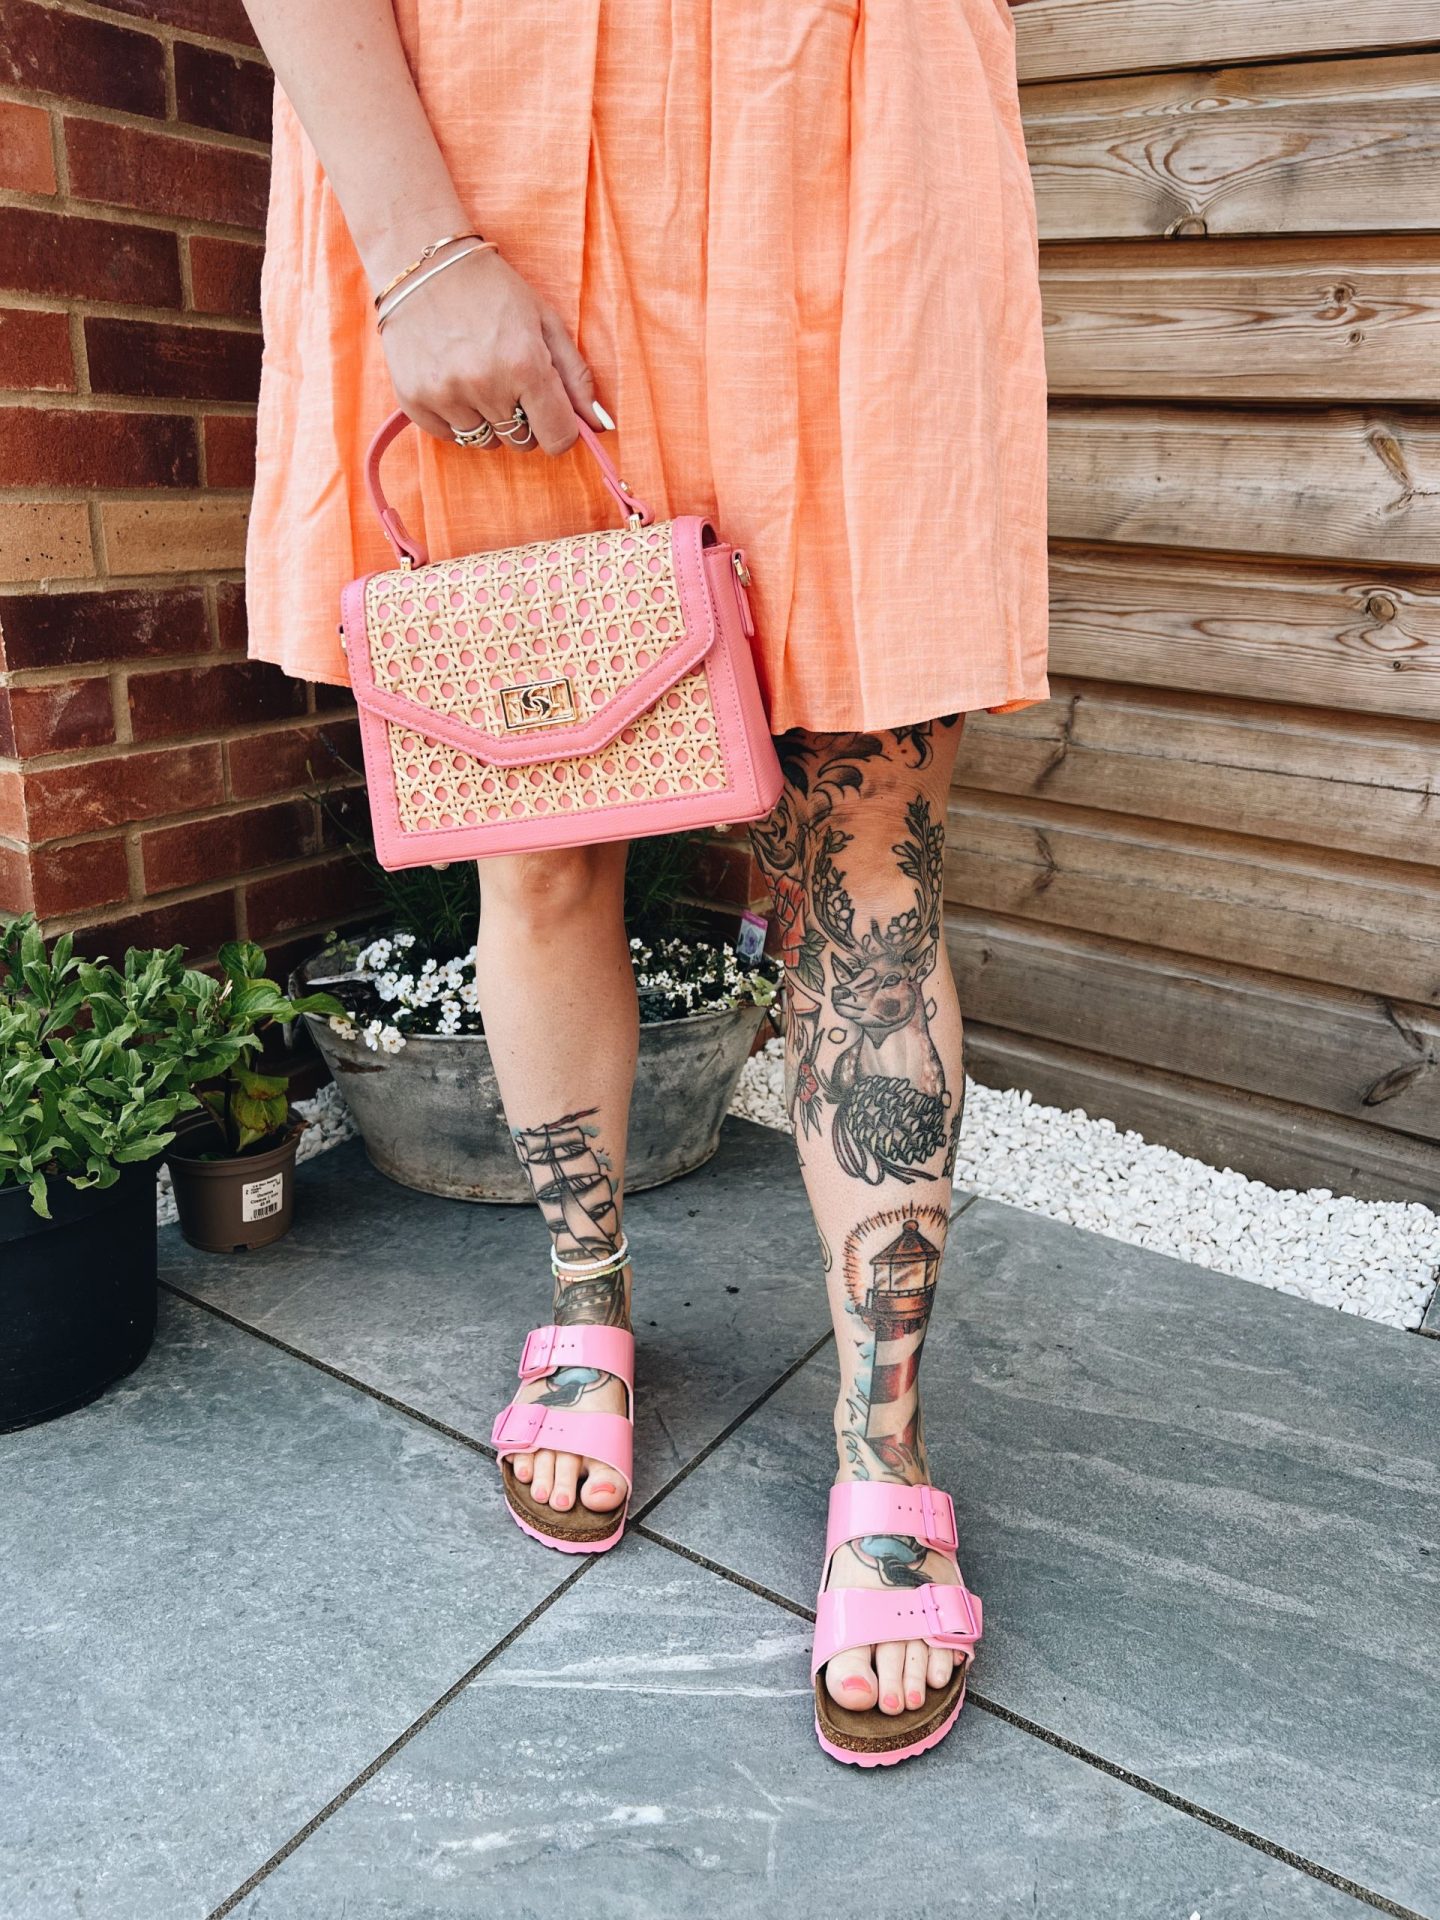 Pretty in pink - statement shoes and accessories for summer dressing